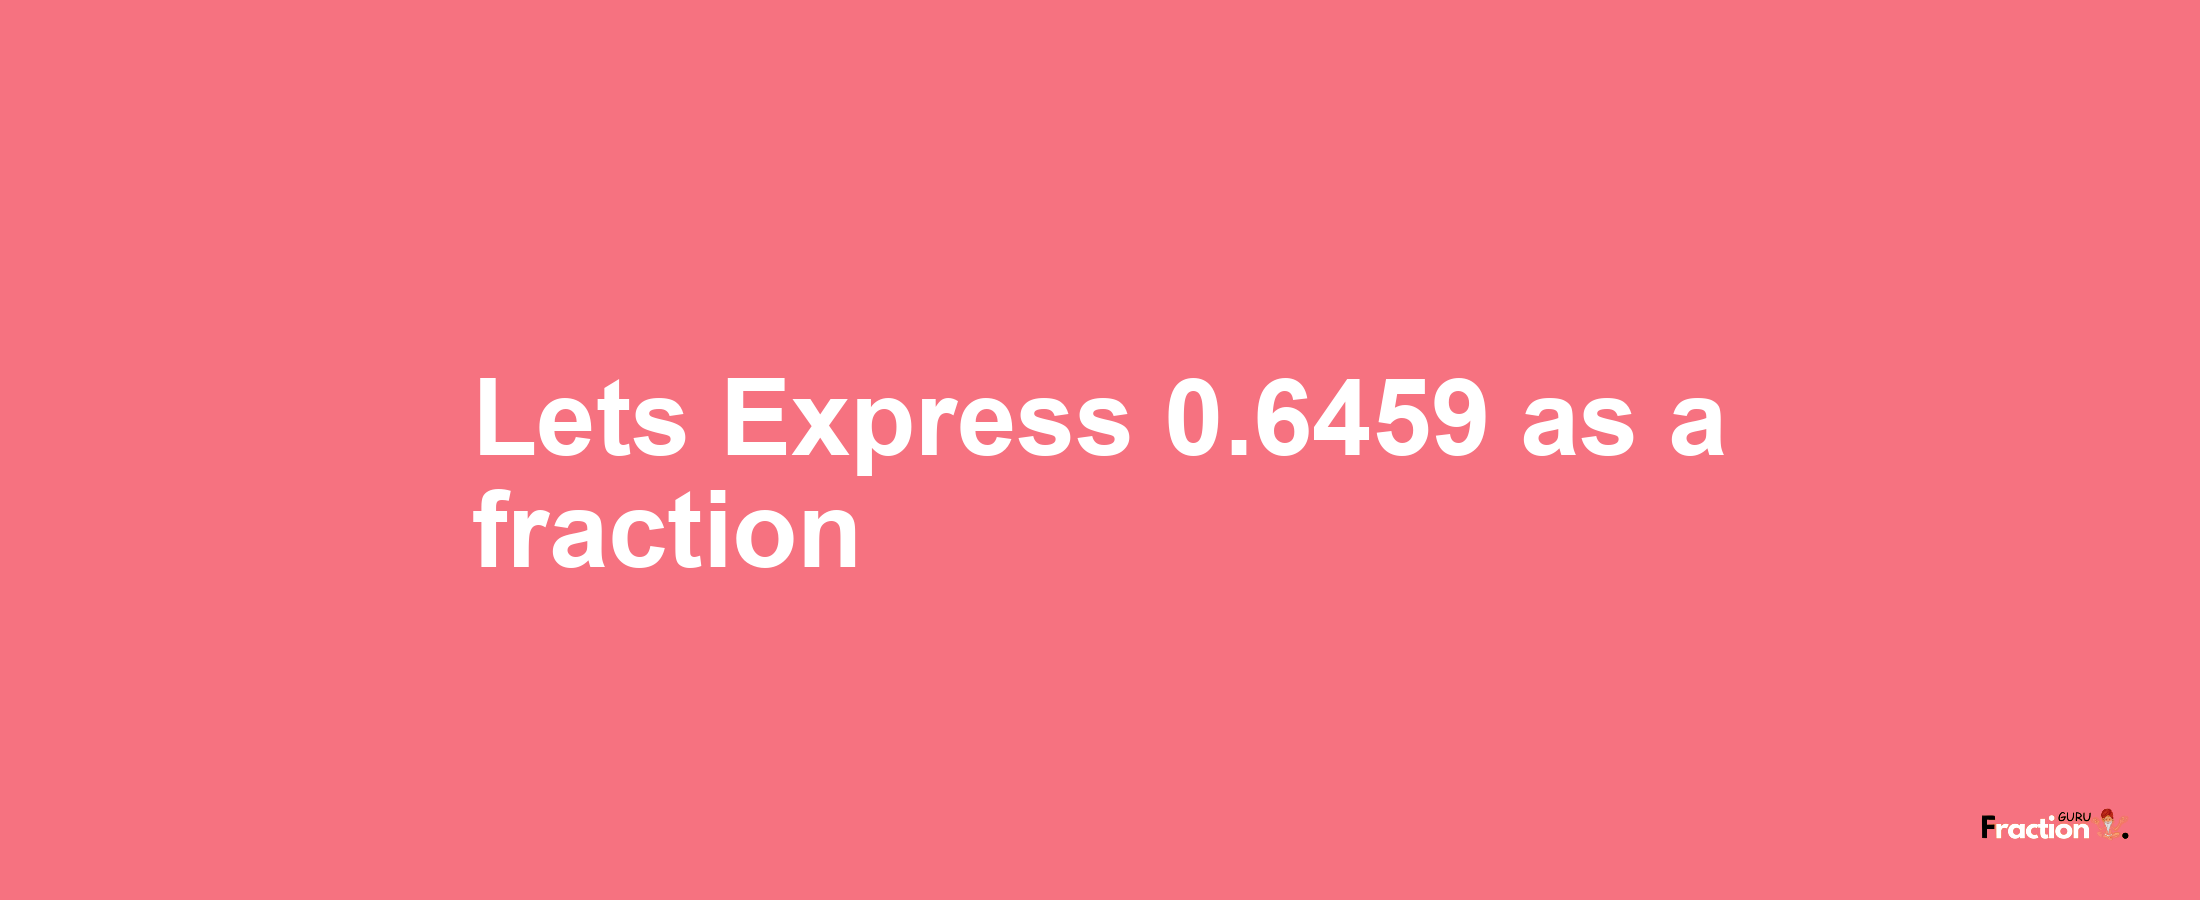 Lets Express 0.6459 as afraction